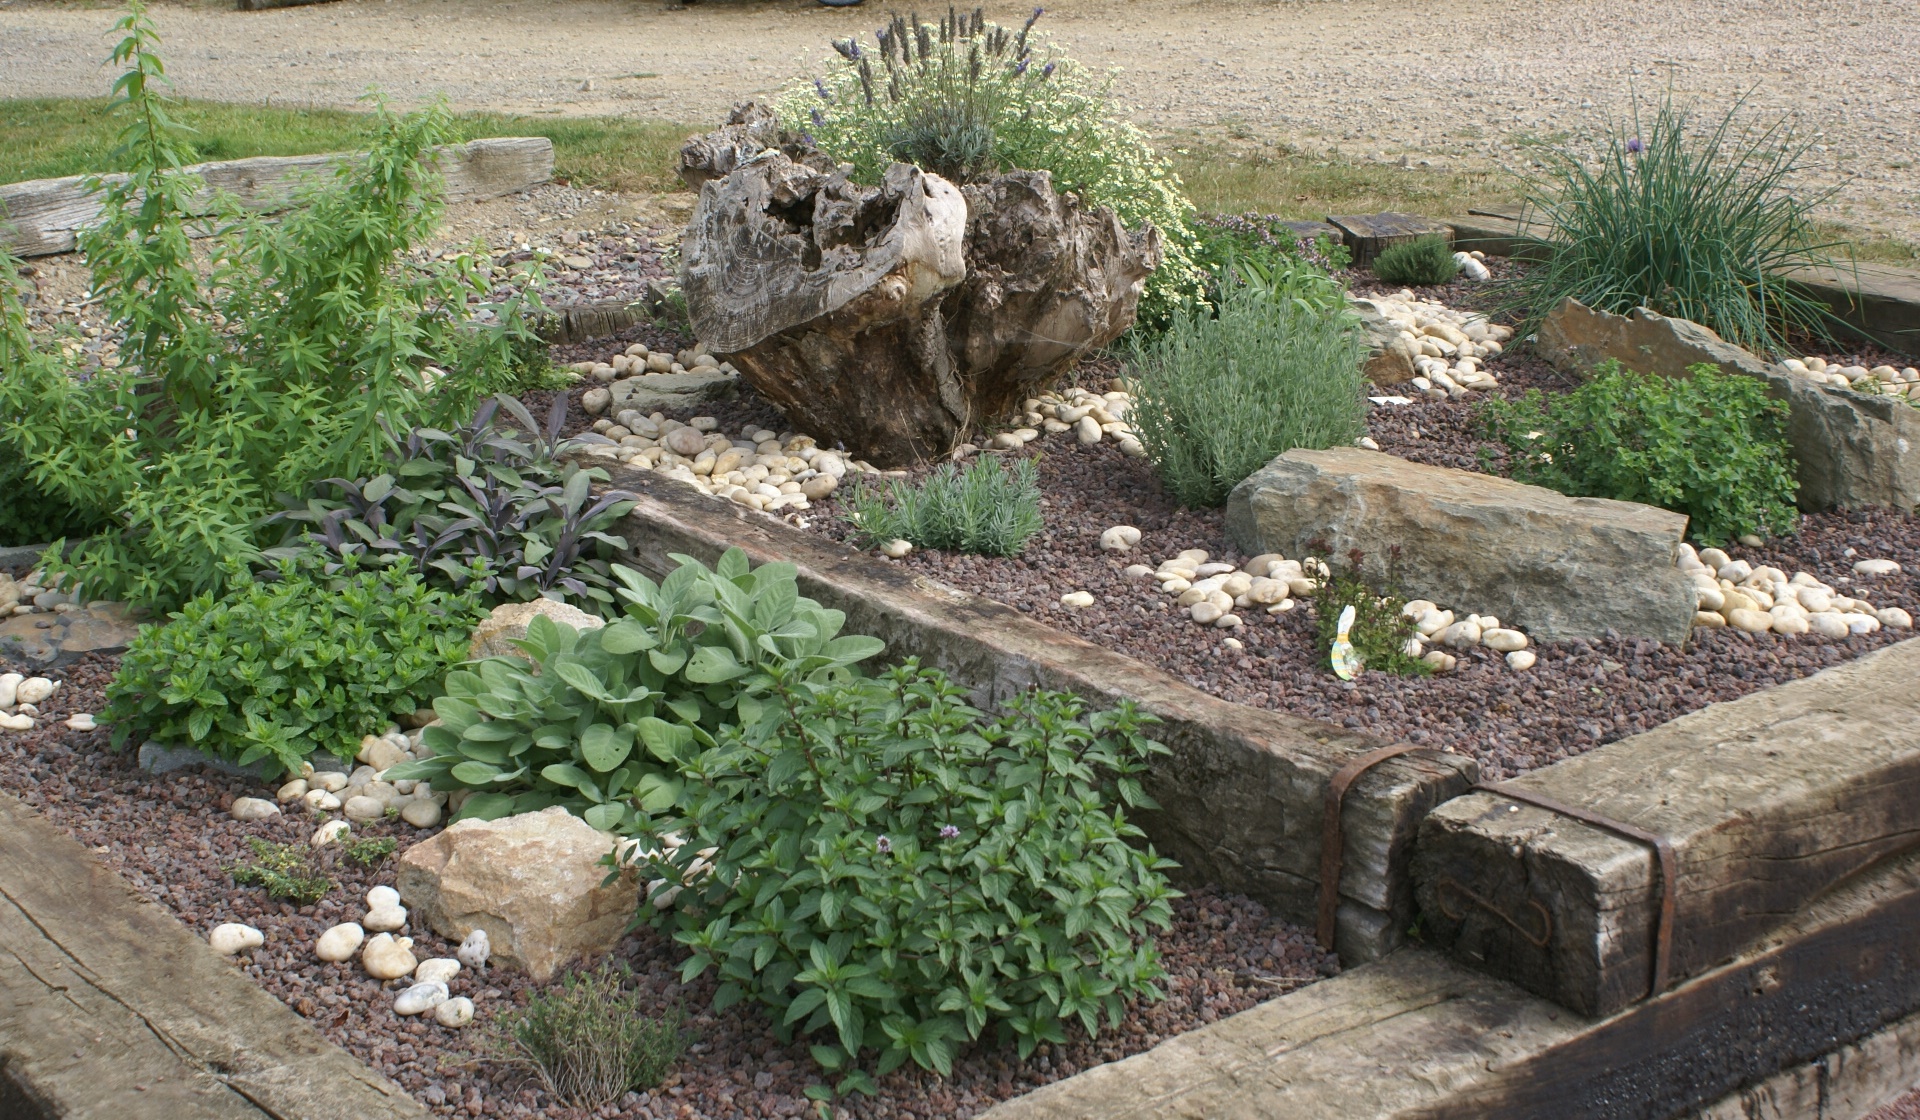 The herb garden at Eco-Gites of Lenault, a holiday cottage in Normandy